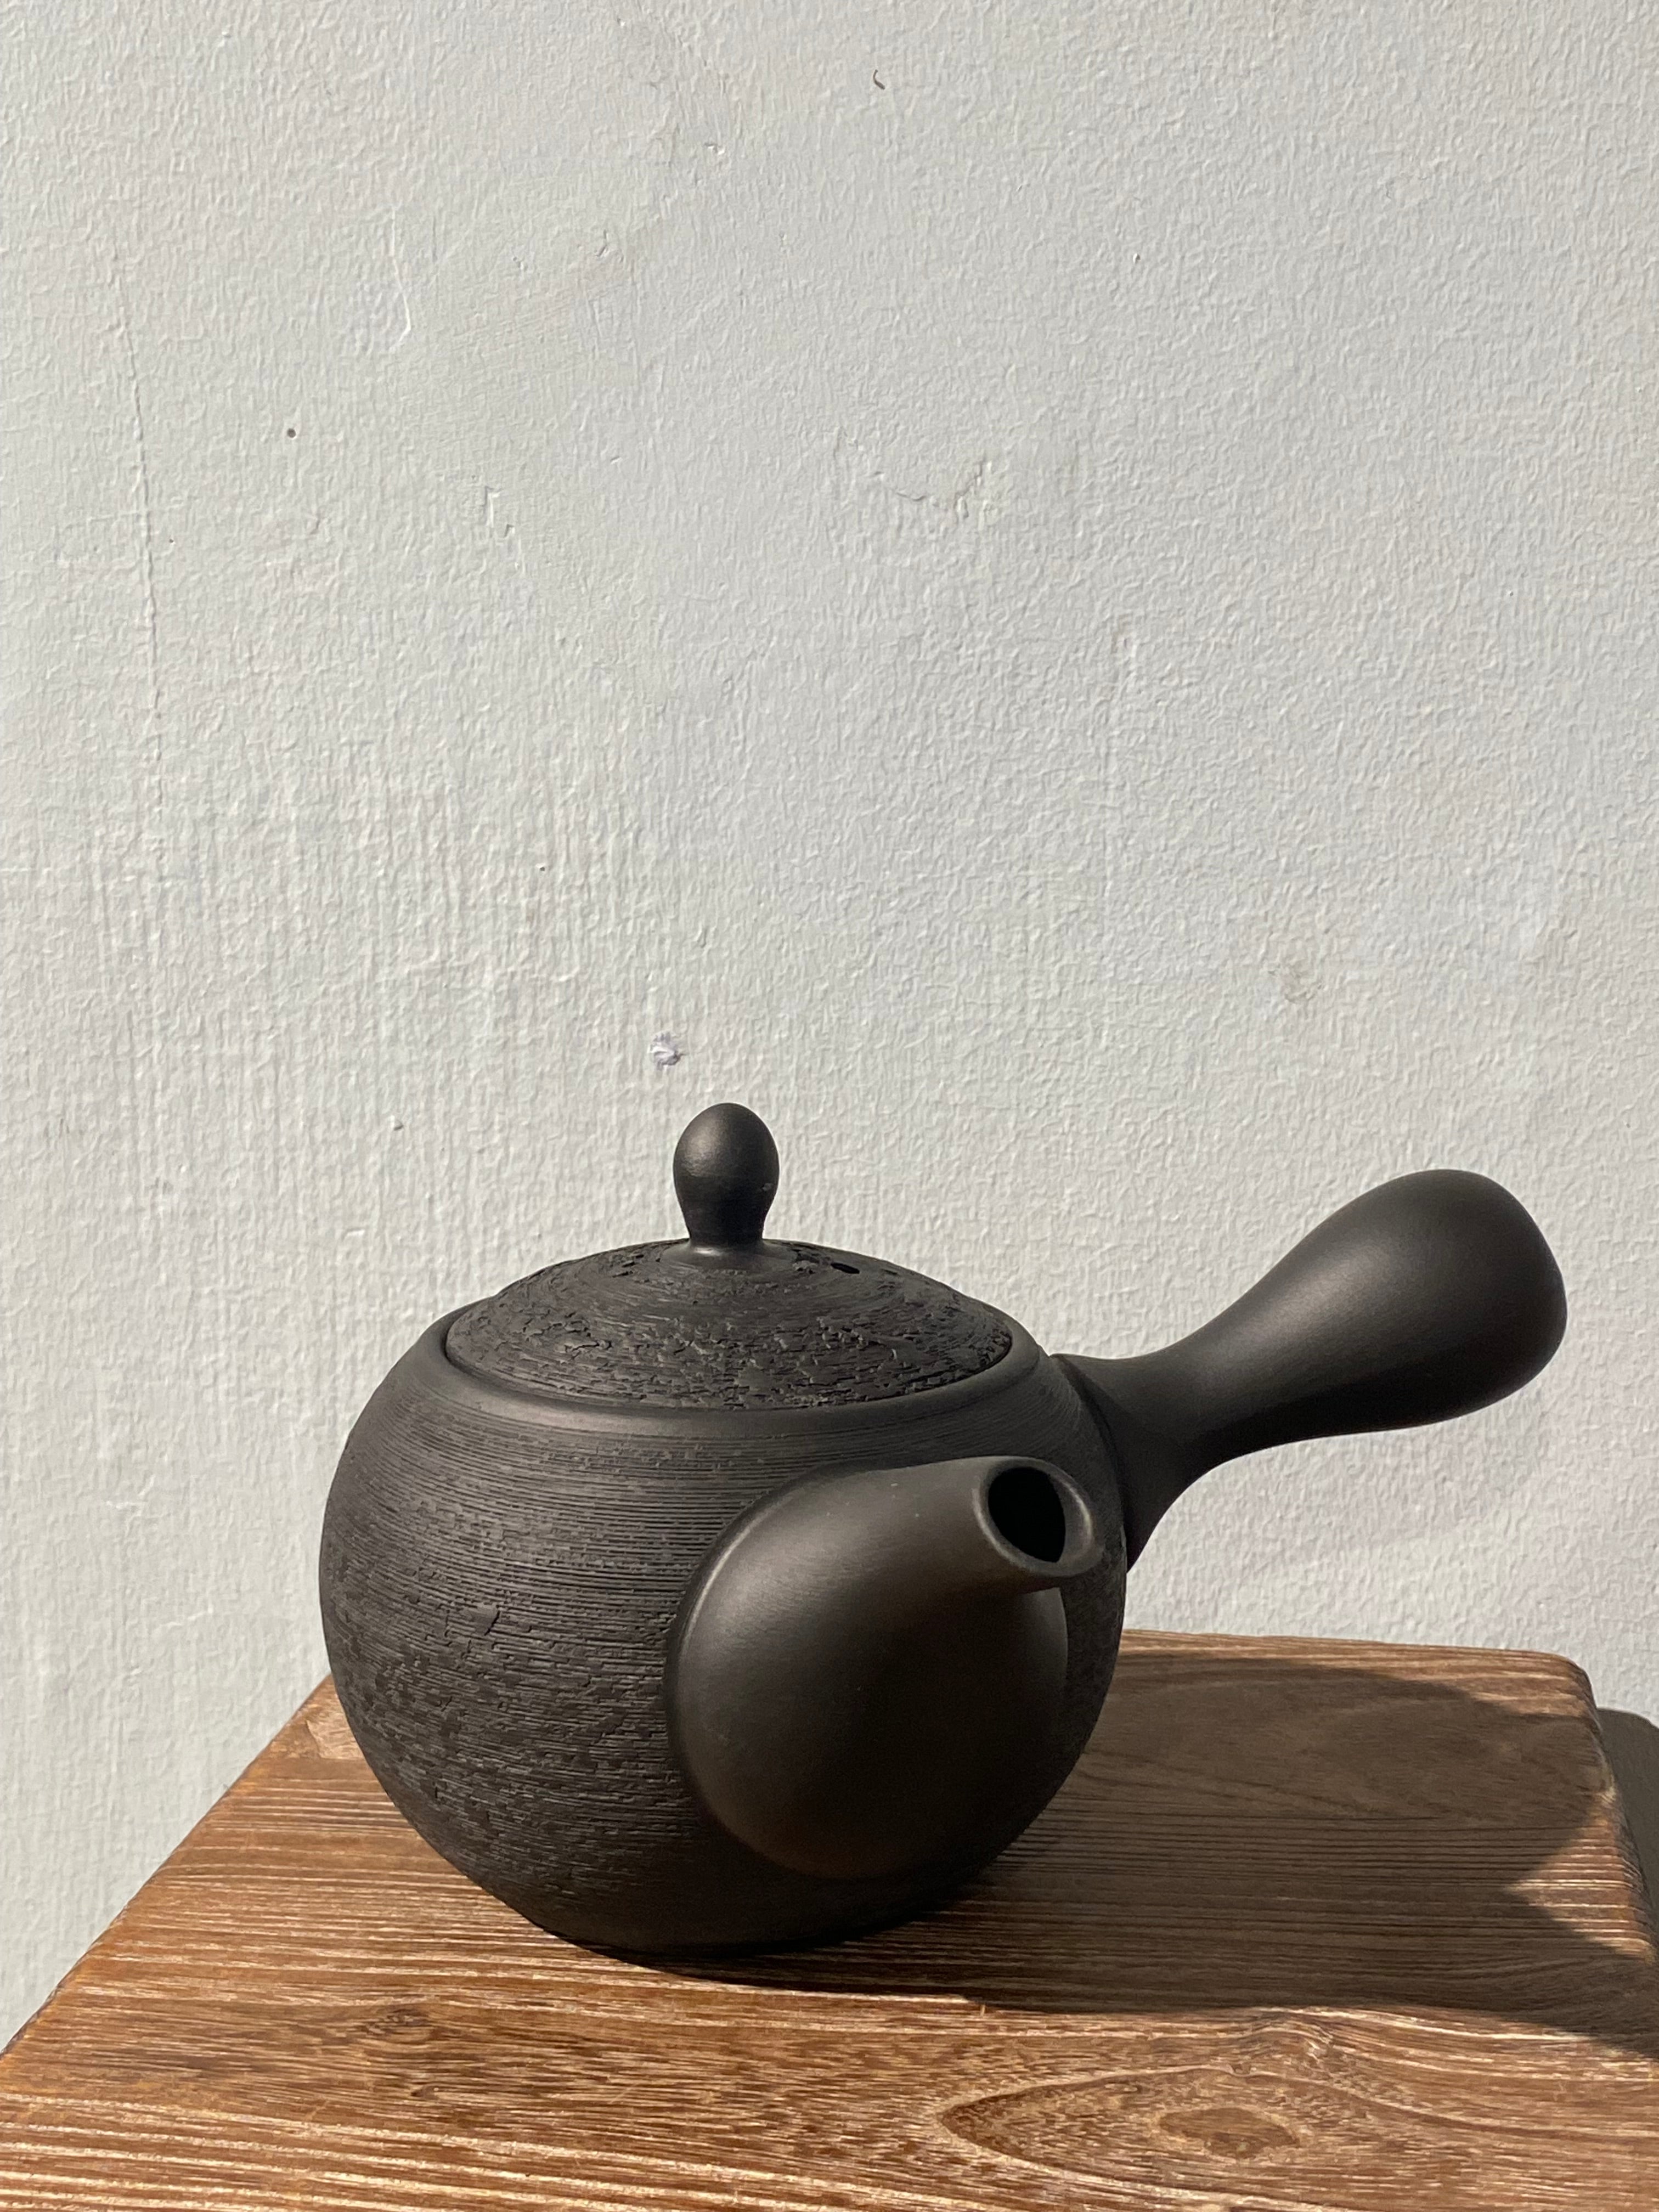 Rustic black teapot with handle